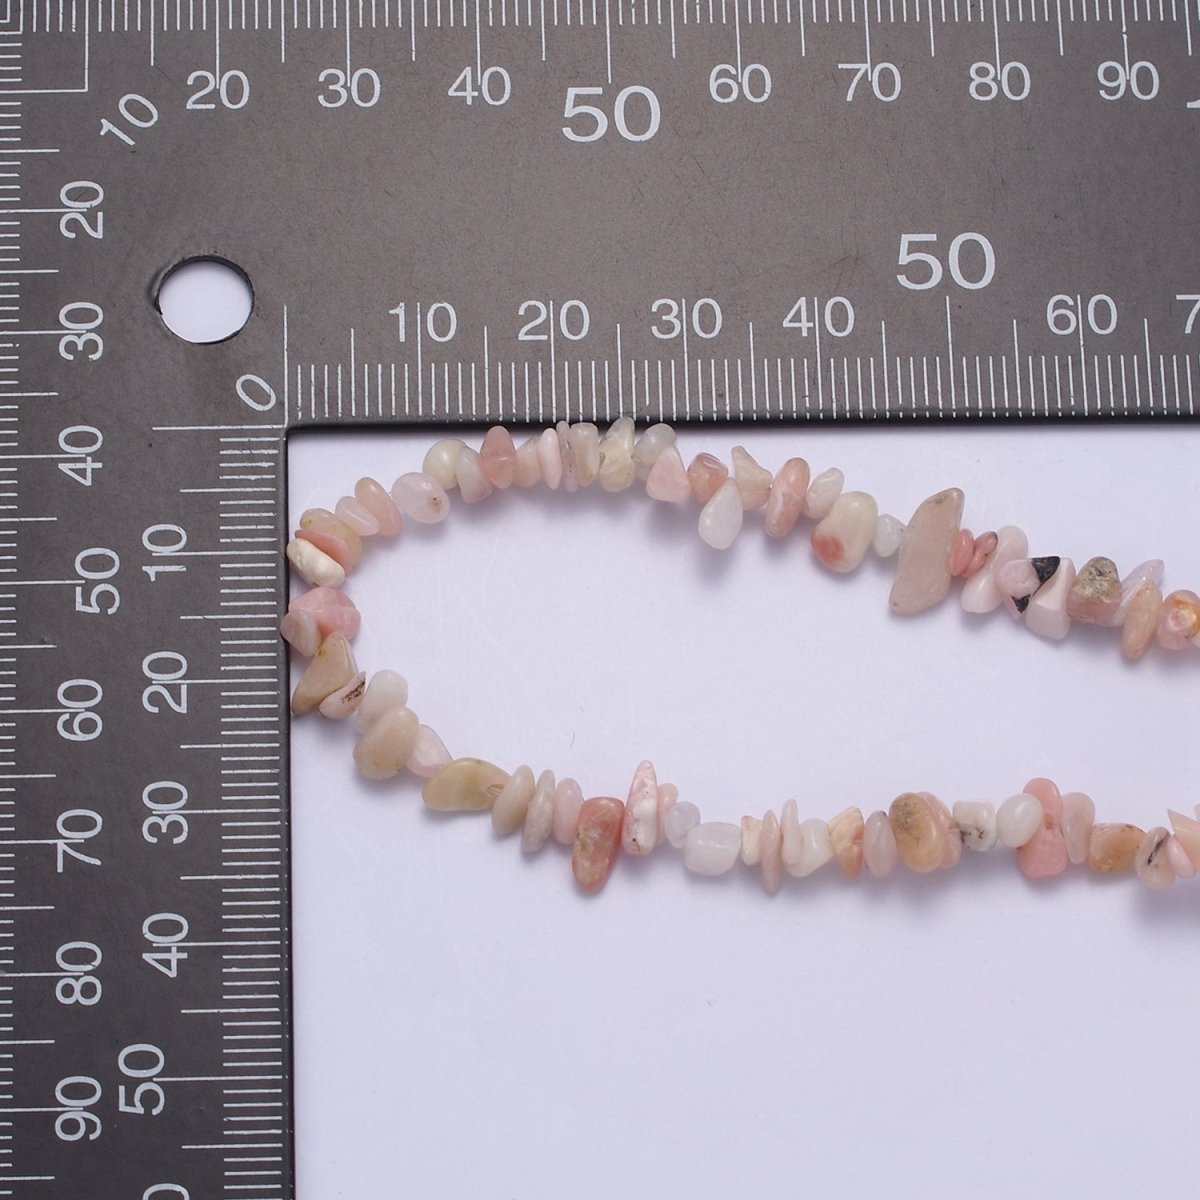 Pink Opal Beaded Necklace - Chip Necklace Healing Crystals, Gemstone Necklace, Handmade Jewelry, Crystal Necklace | WA-631 Clearance Pricing - DLUXCA